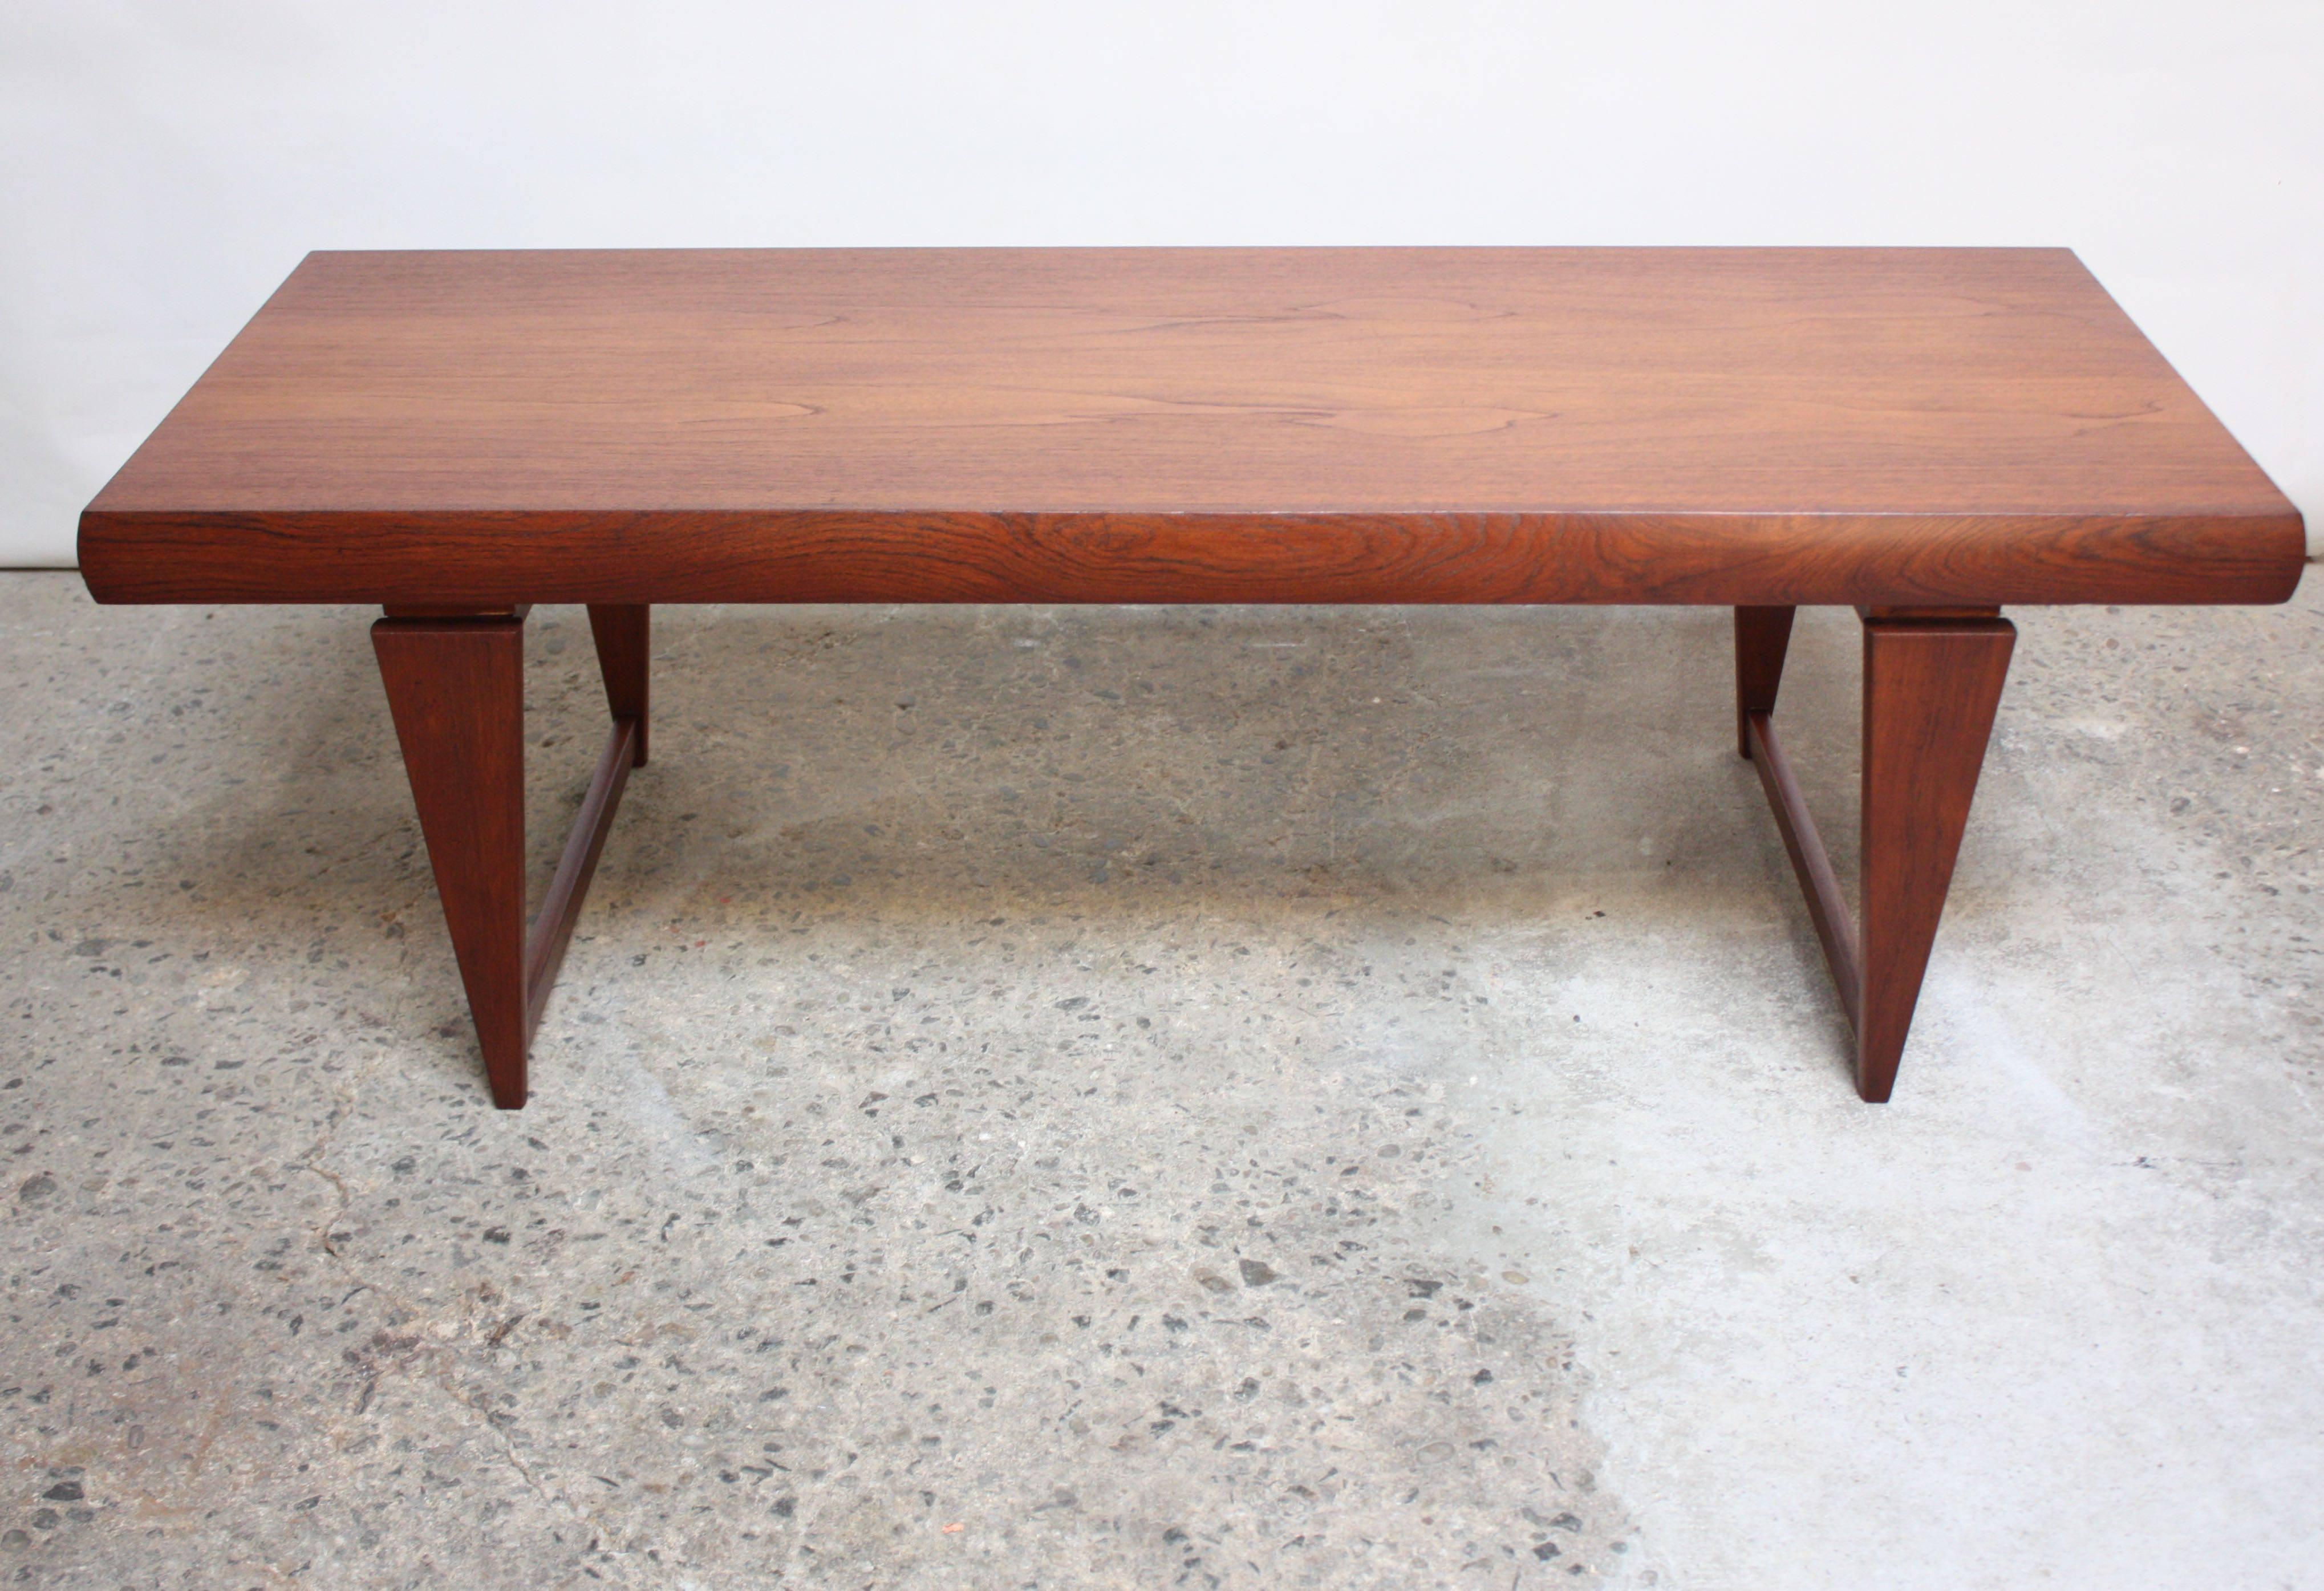 This teak coffee table features two extensions: one a draw leaf, and the other a shallow drawer. The table extensions can be pulled out individually or together. When independently extended (drawer or leaf out), the length goes from 62.75